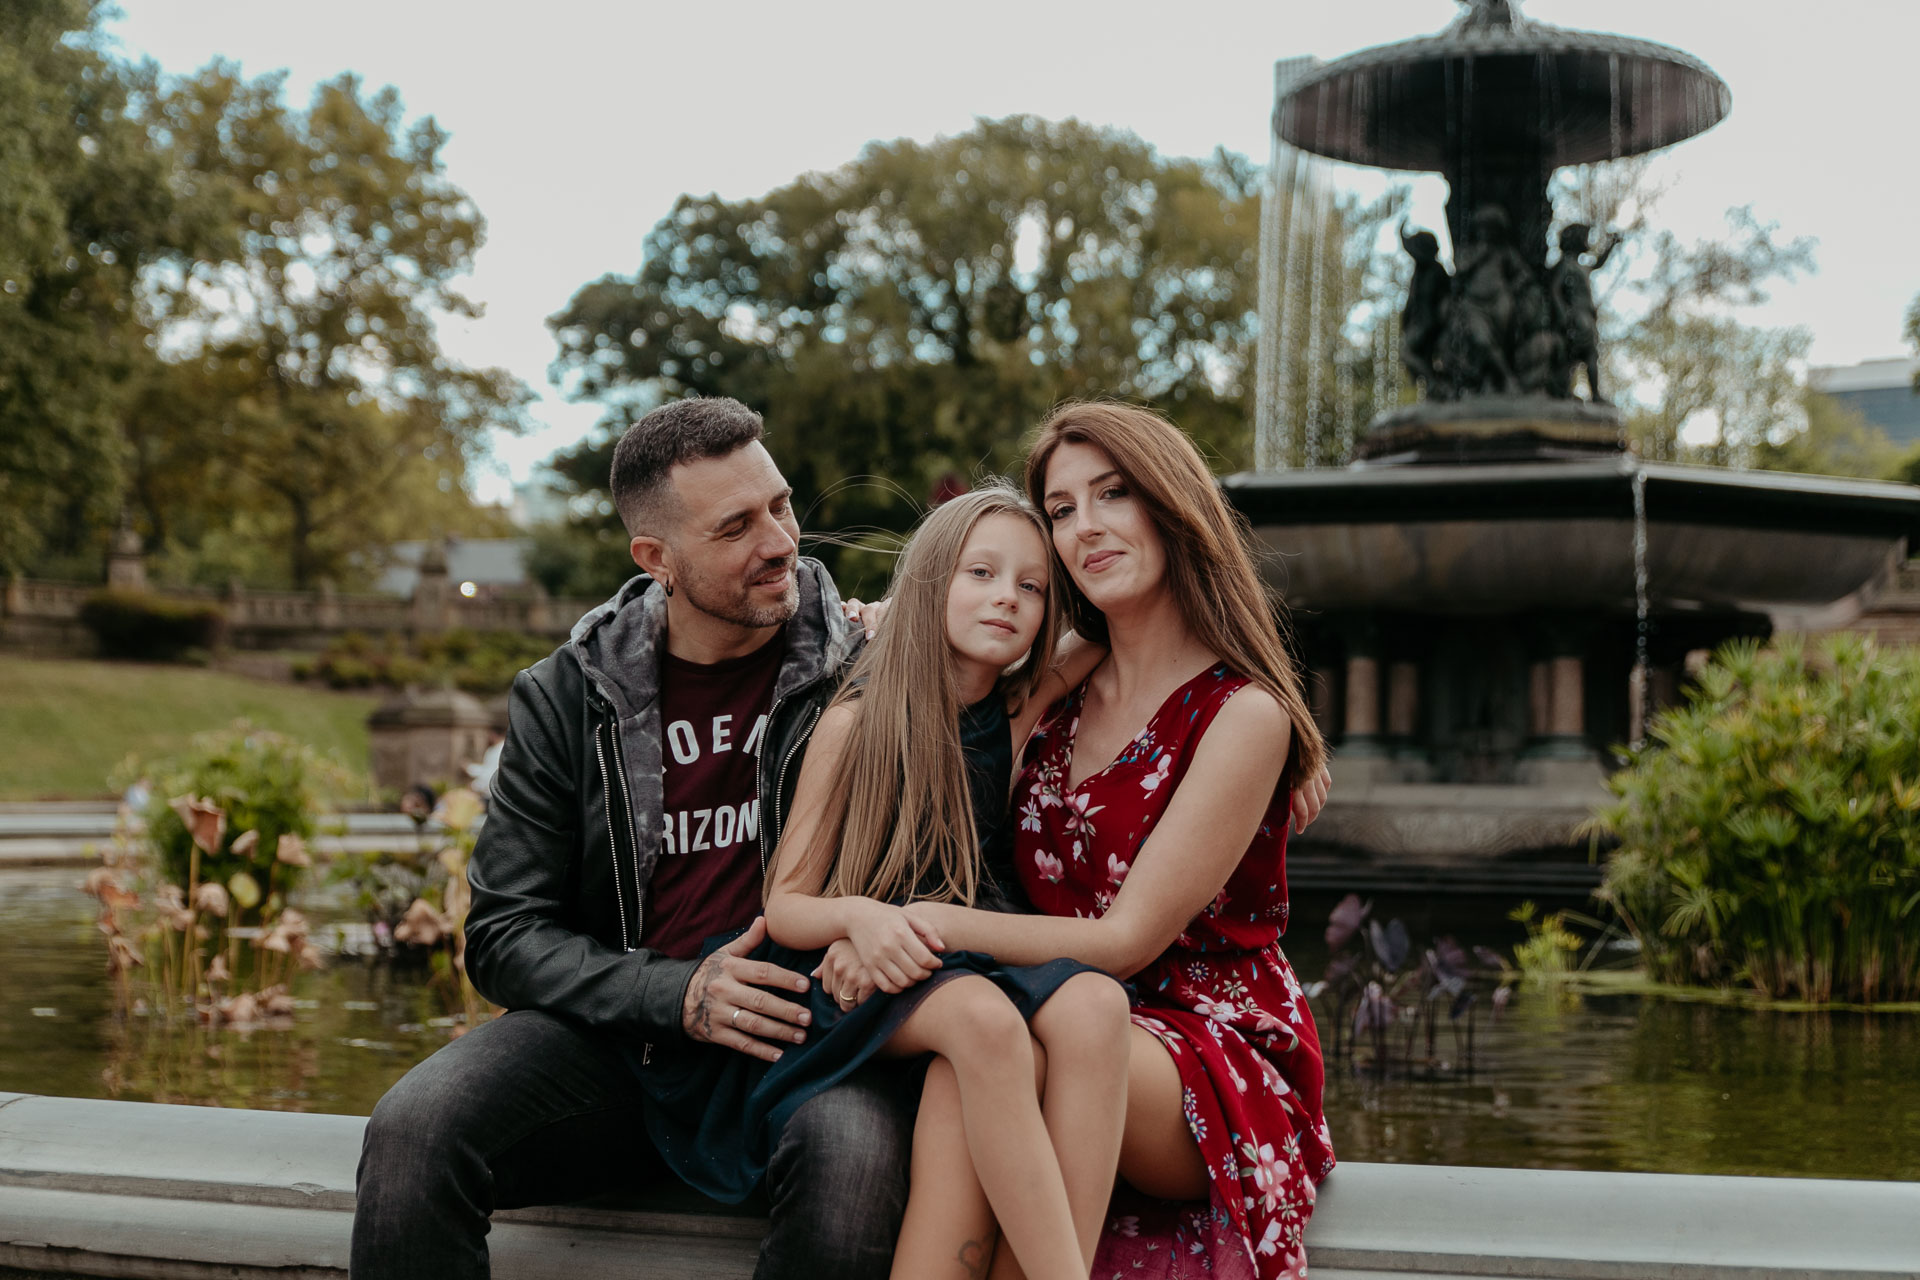 family photoshoot at Bethesda fountain in central park